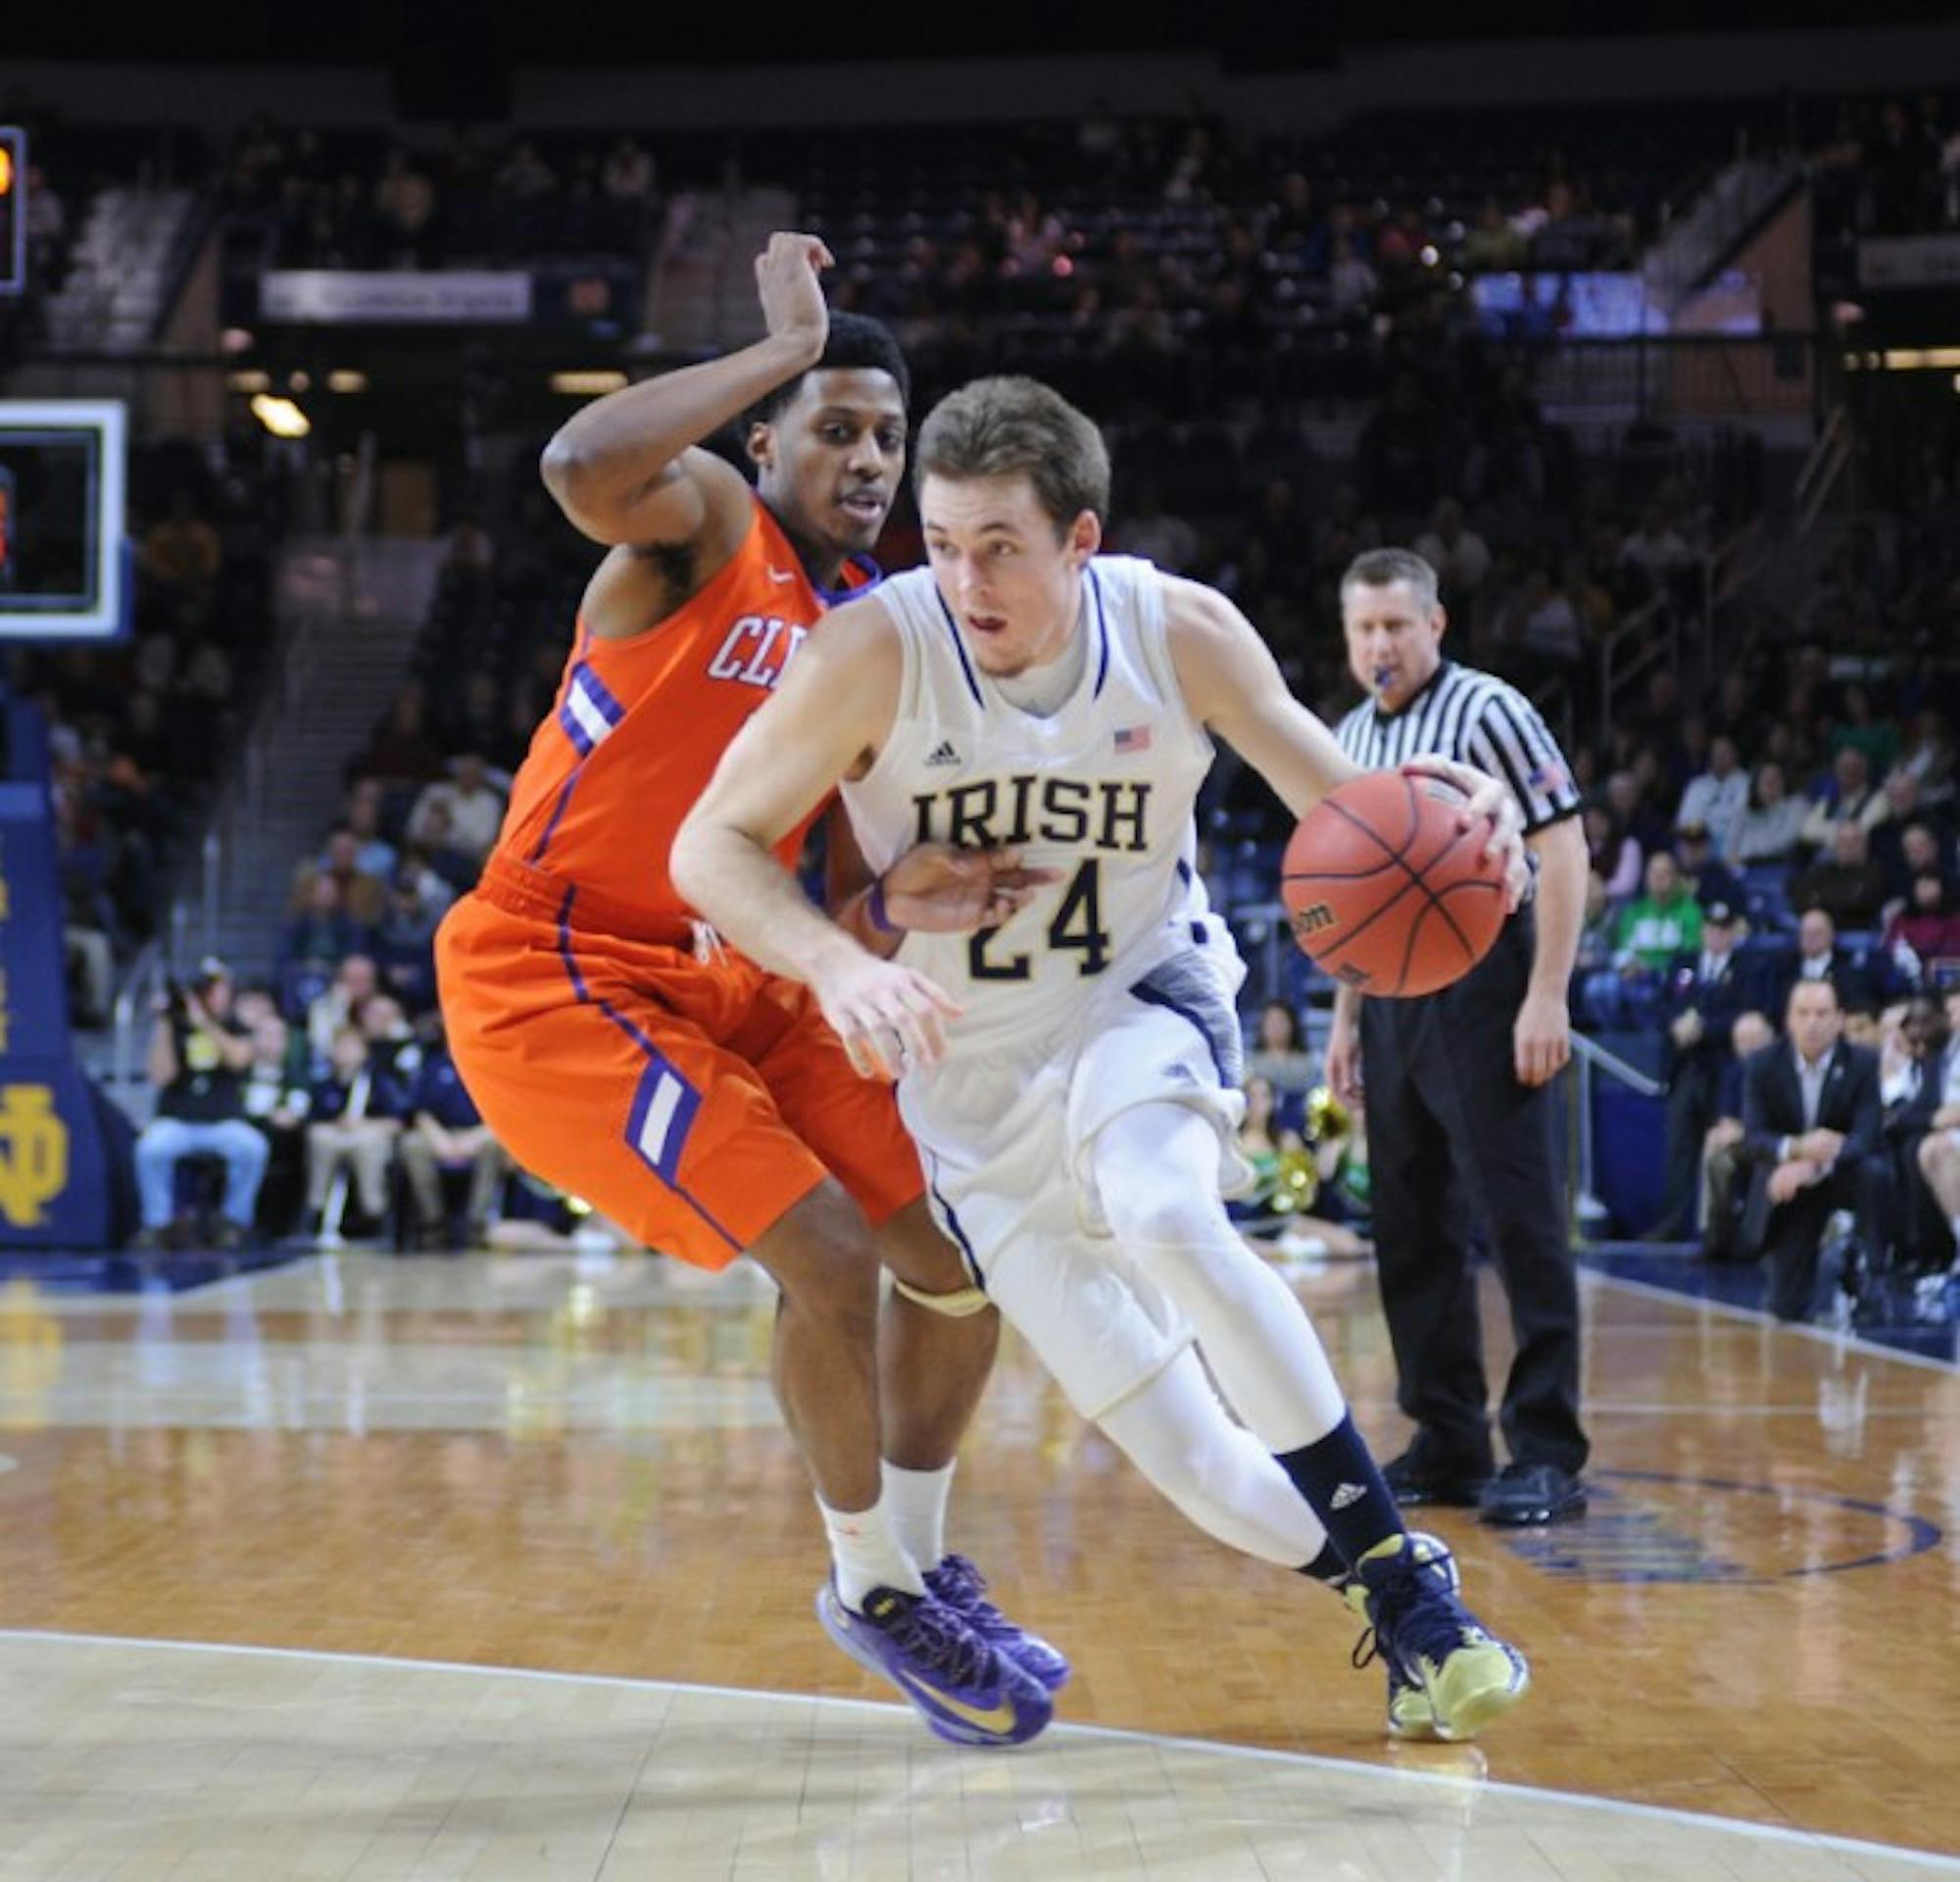 Irish junior Pat Cannaughton attacks the basket during Notre Dame's 68-64 double overtime victory over Clemson on Tuesday.